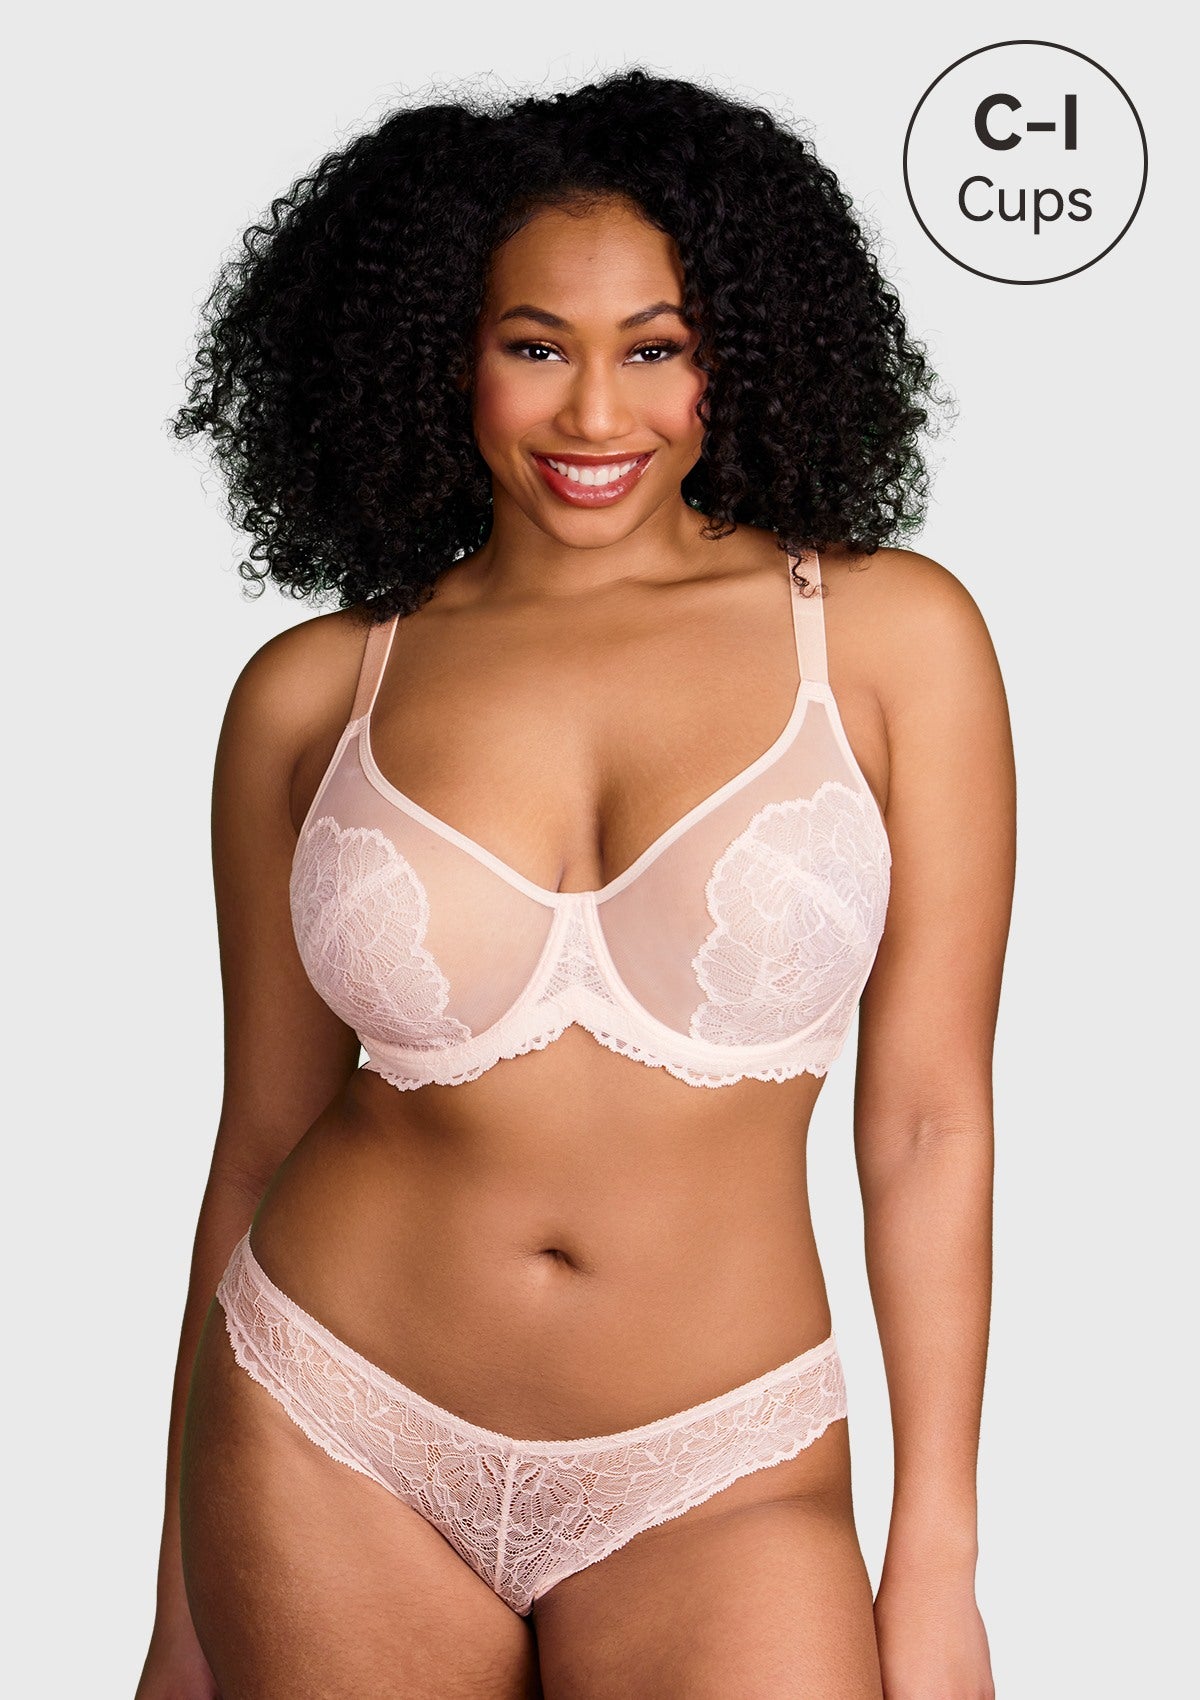 HSIA Blossom Sheer Lace Bra: Comfortable Underwire Bra For Big Busts - White / 36 / G